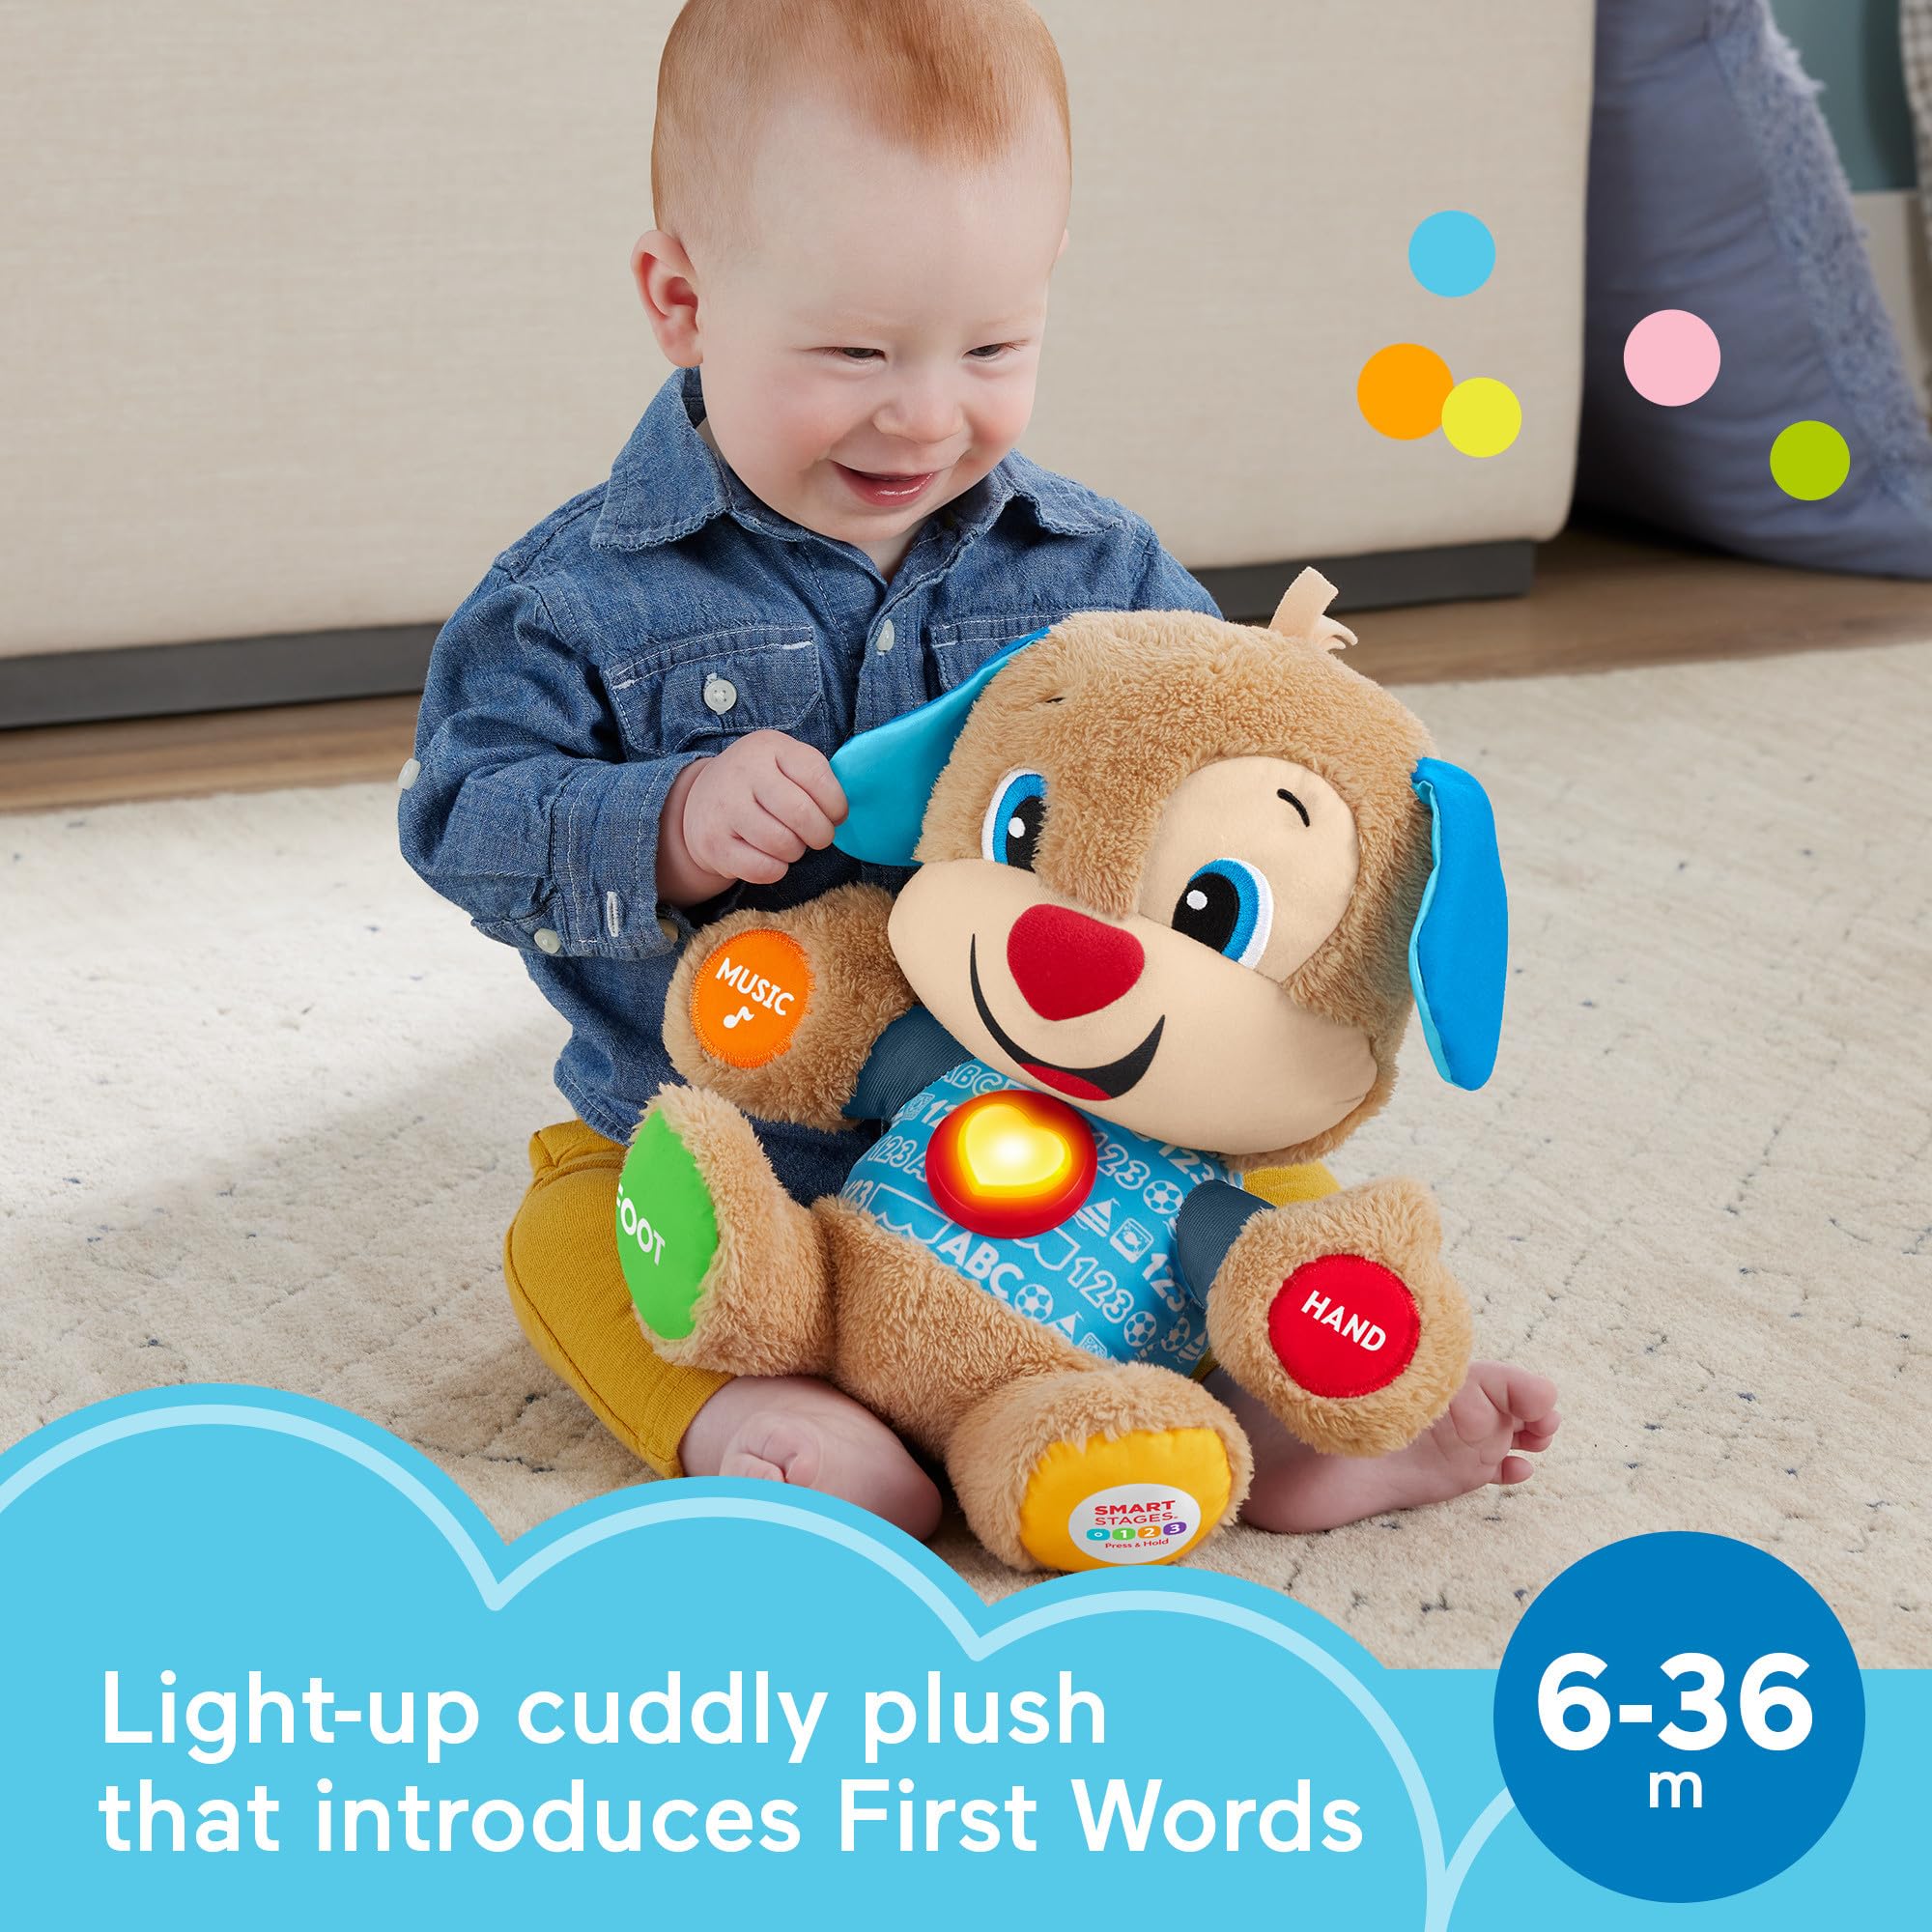 Fisher-Price Laugh & Learn Baby Learning Toy, Smart Stages Puppy Musical Plush with Lights & Educational Content for Ages 6+ Months (Amazon Exclusive)